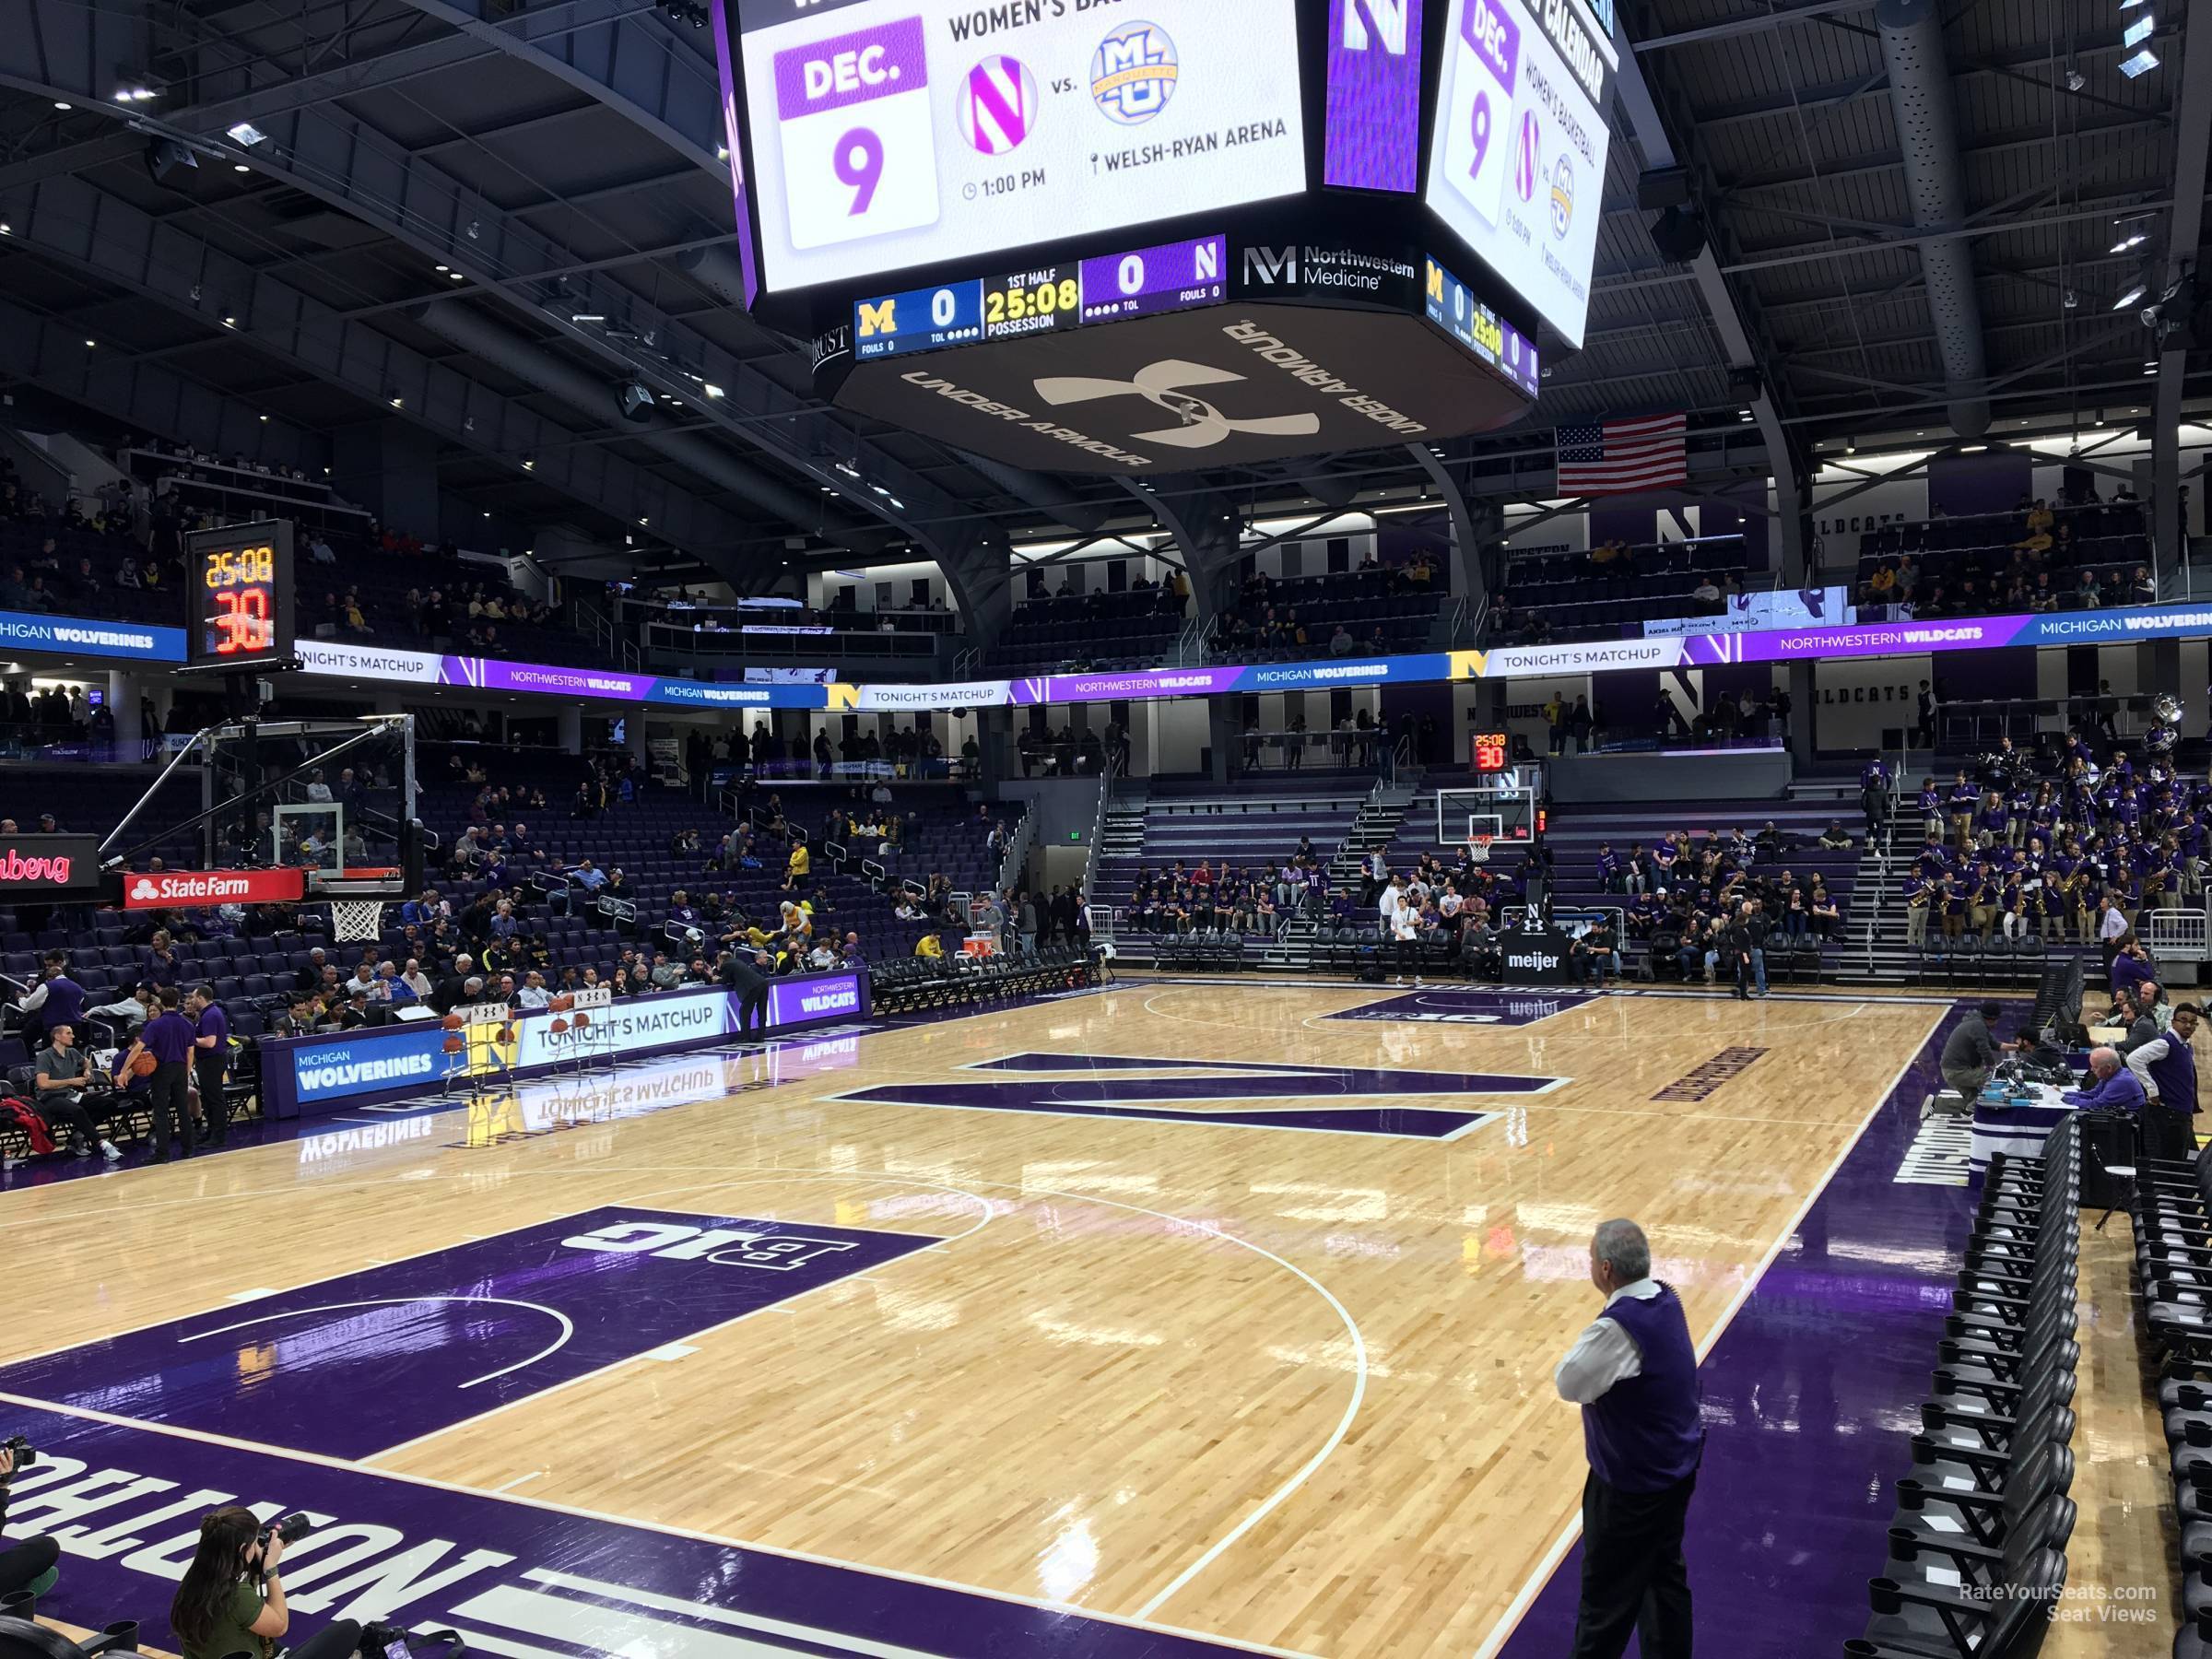 section 103, row 5 seat view  - welsh-ryan arena